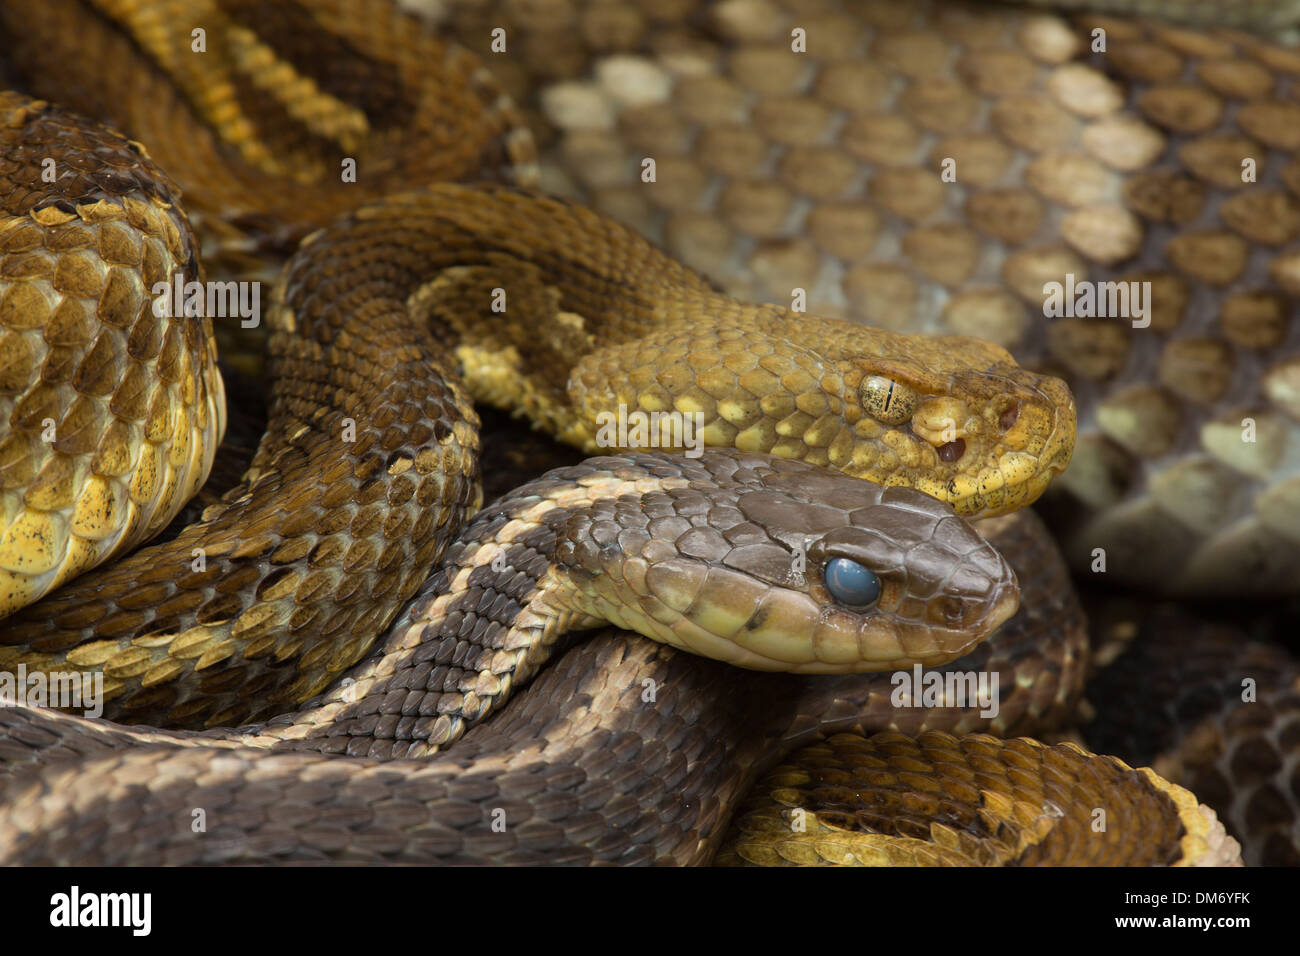 Timber rattlesnakes, Crotalus horridus, and common garter snake, Thamnophis sirtalis, gravid females gathered at rookery site Stock Photo